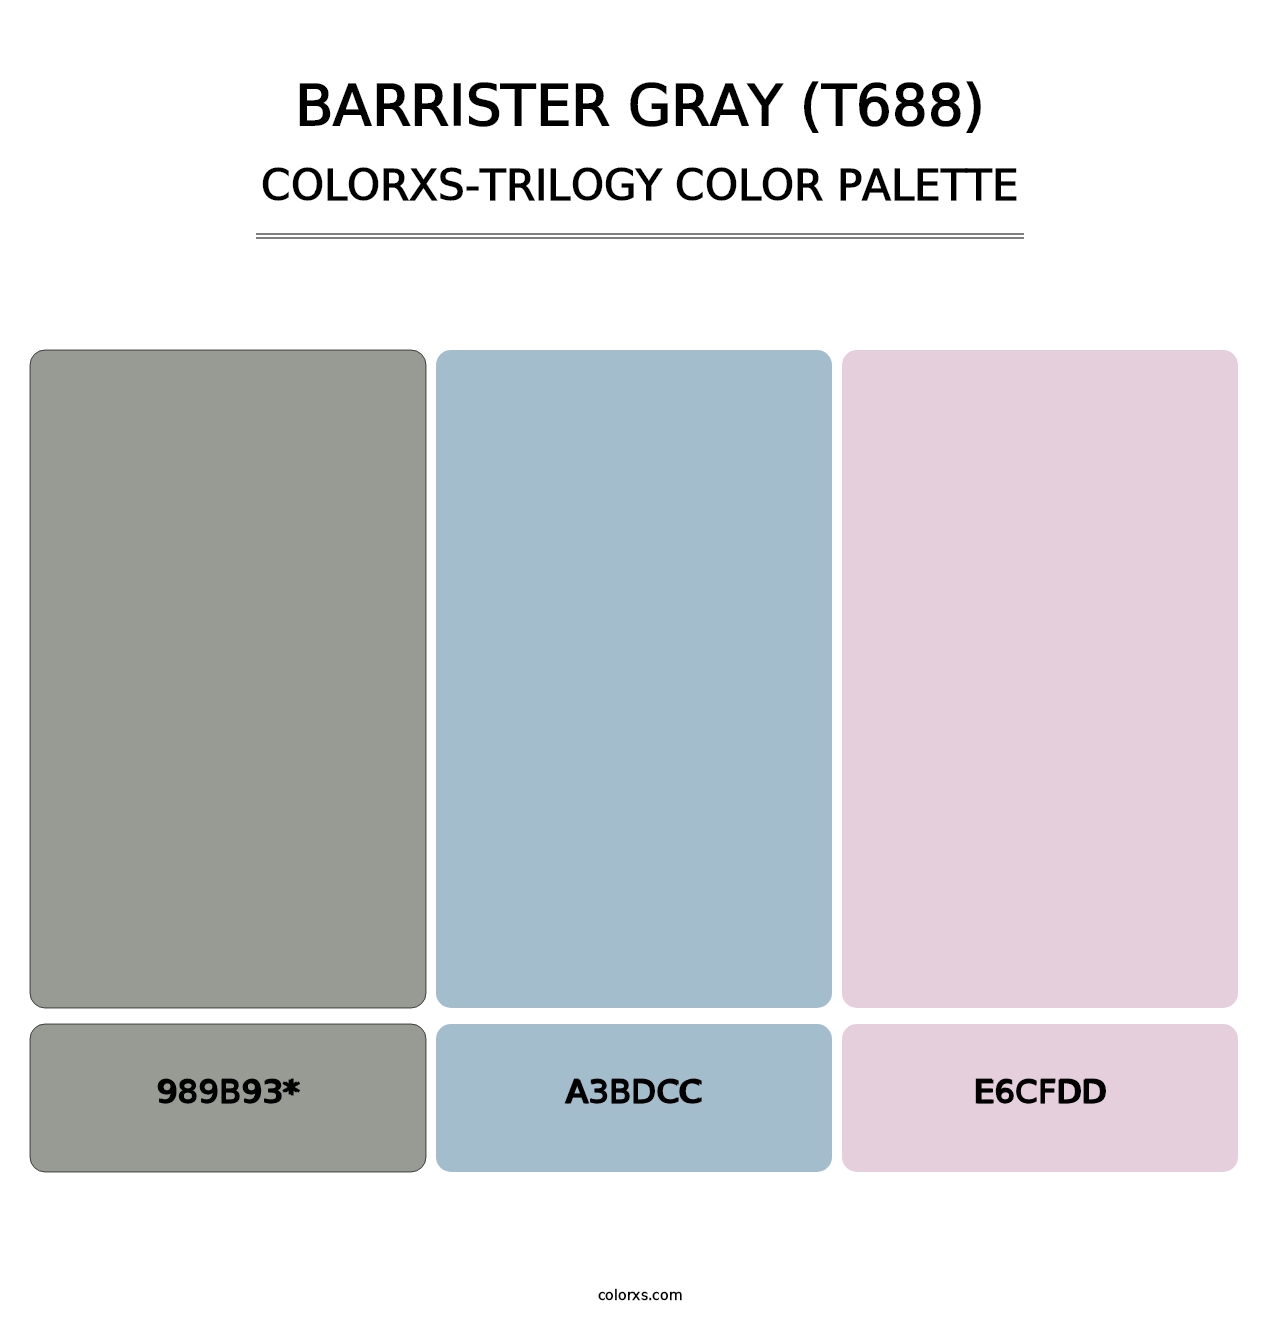 Barrister Gray (T688) - Colorxs Trilogy Palette